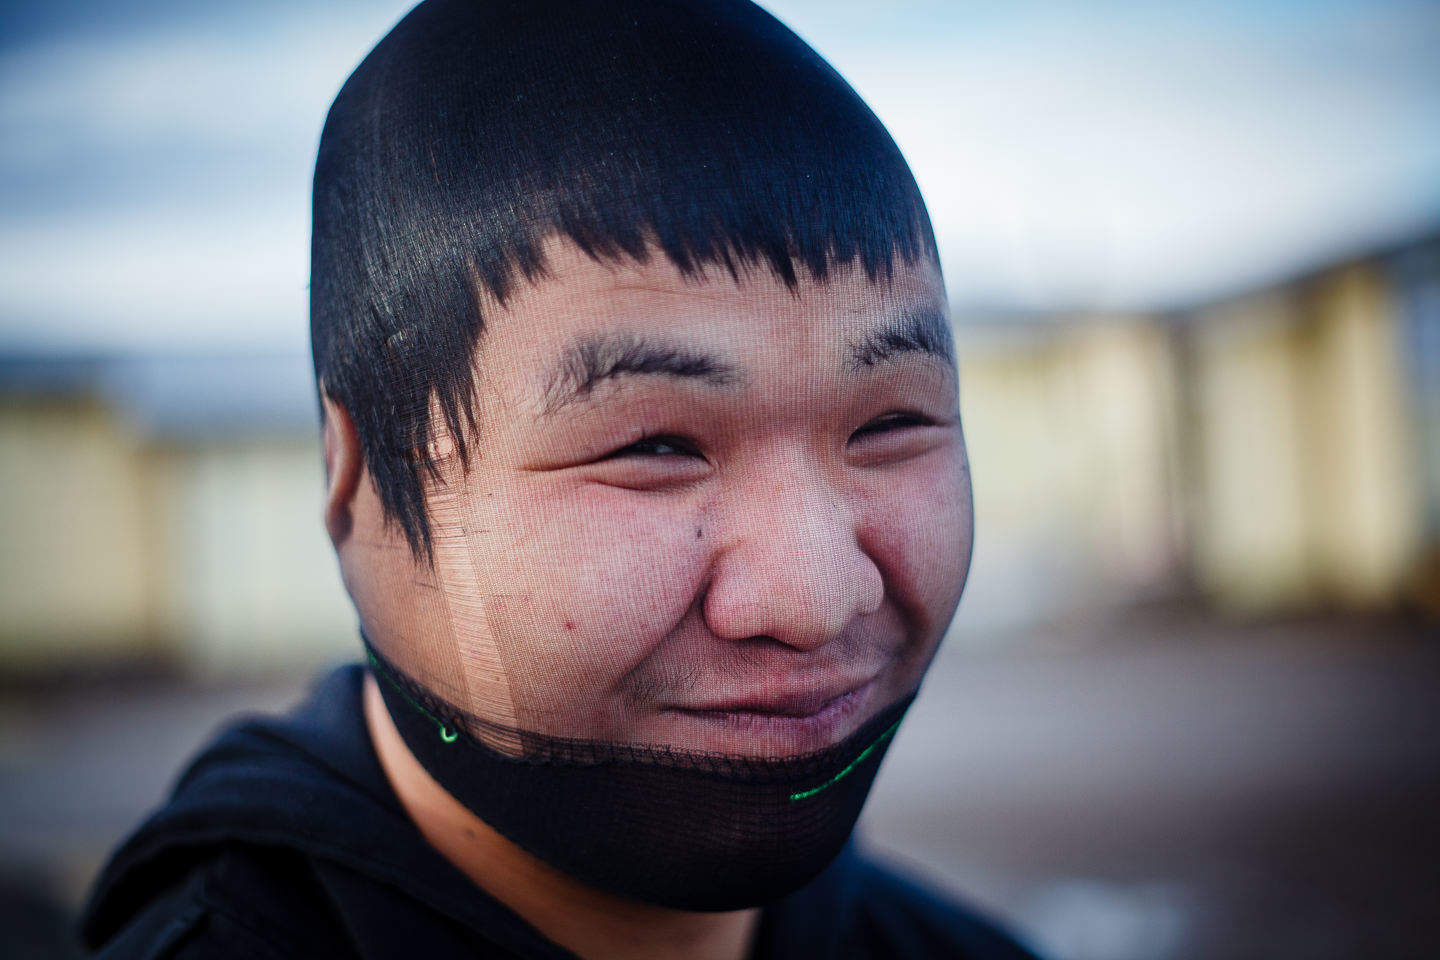 A youth playing around in the village of Kugluktuk, Canada.